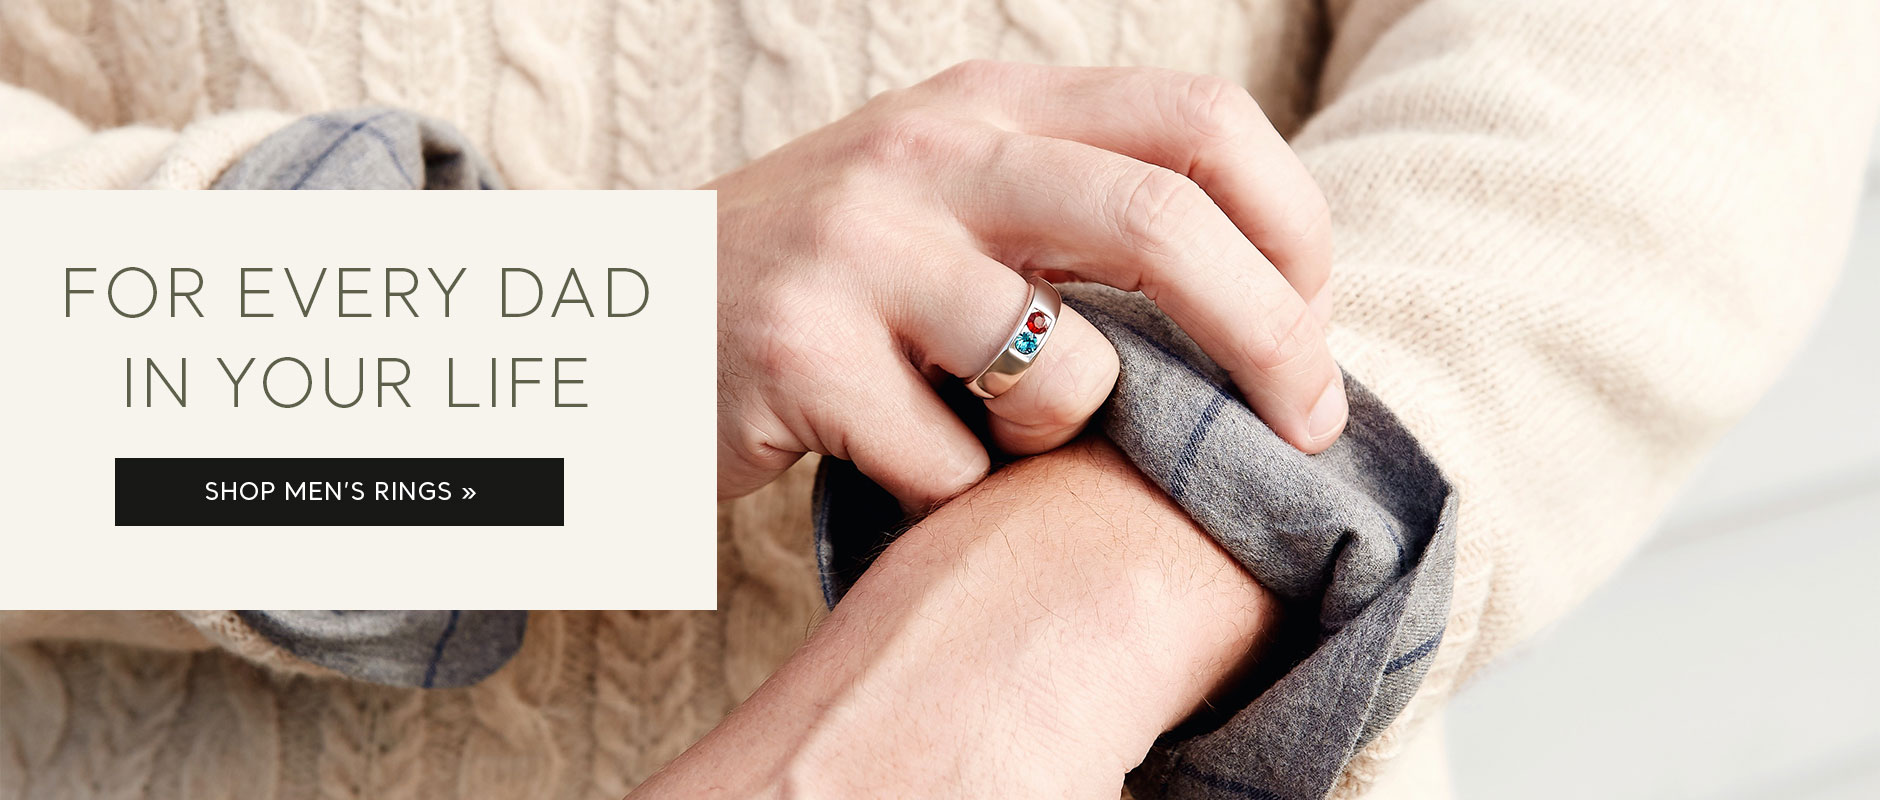 For Every Dad in your Life. Shop Men's Rings.